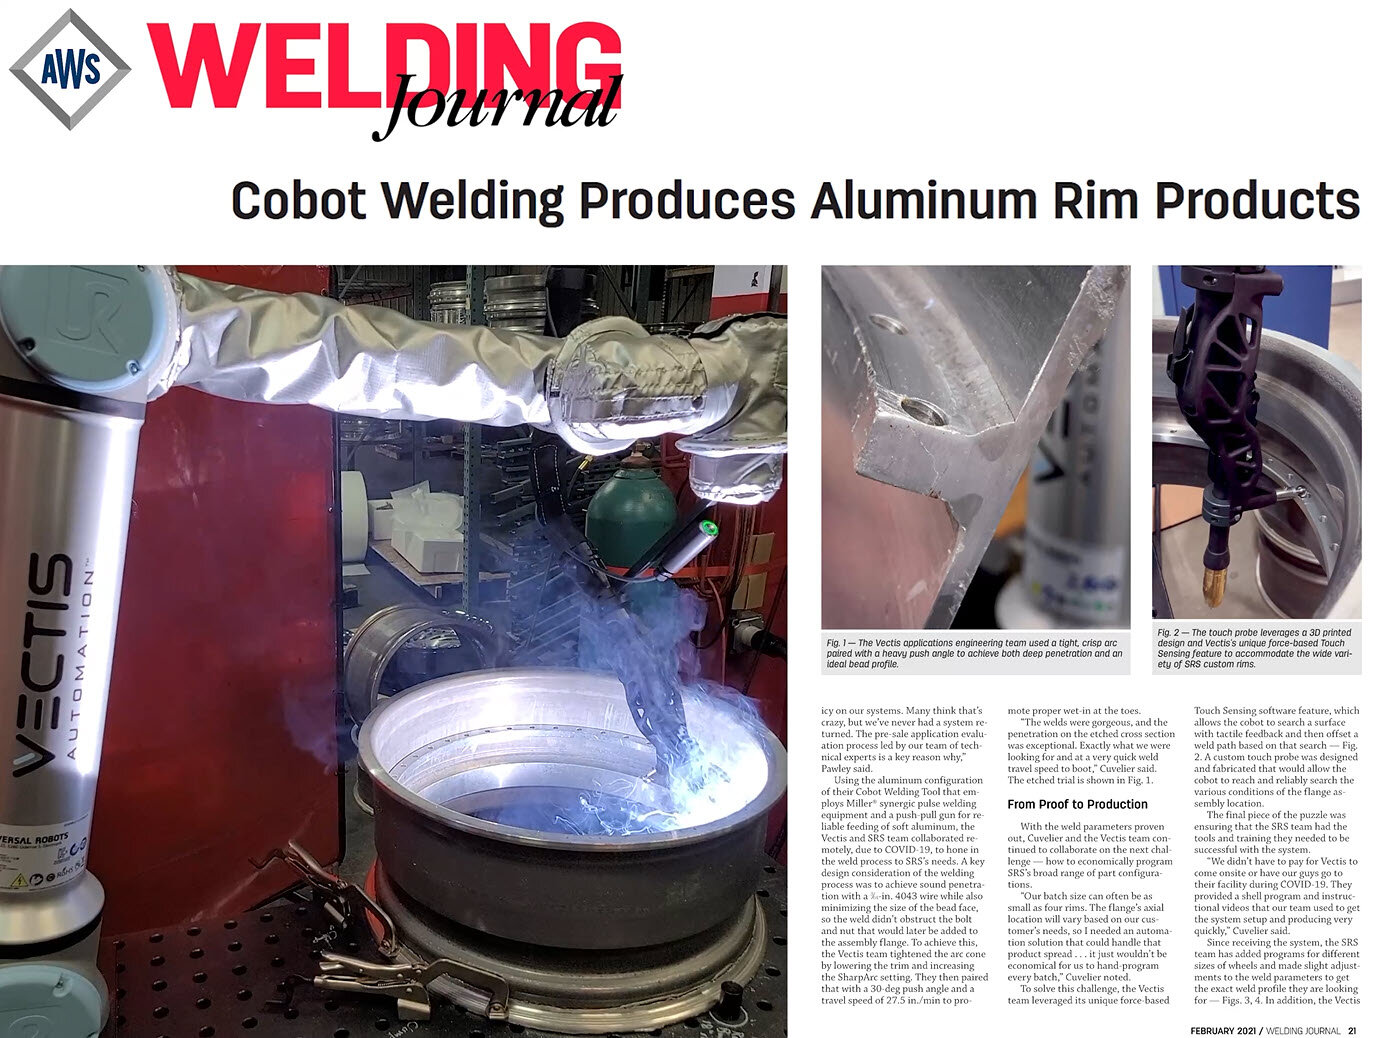 Vectis Automation Cobot Welding  in action - aluminum